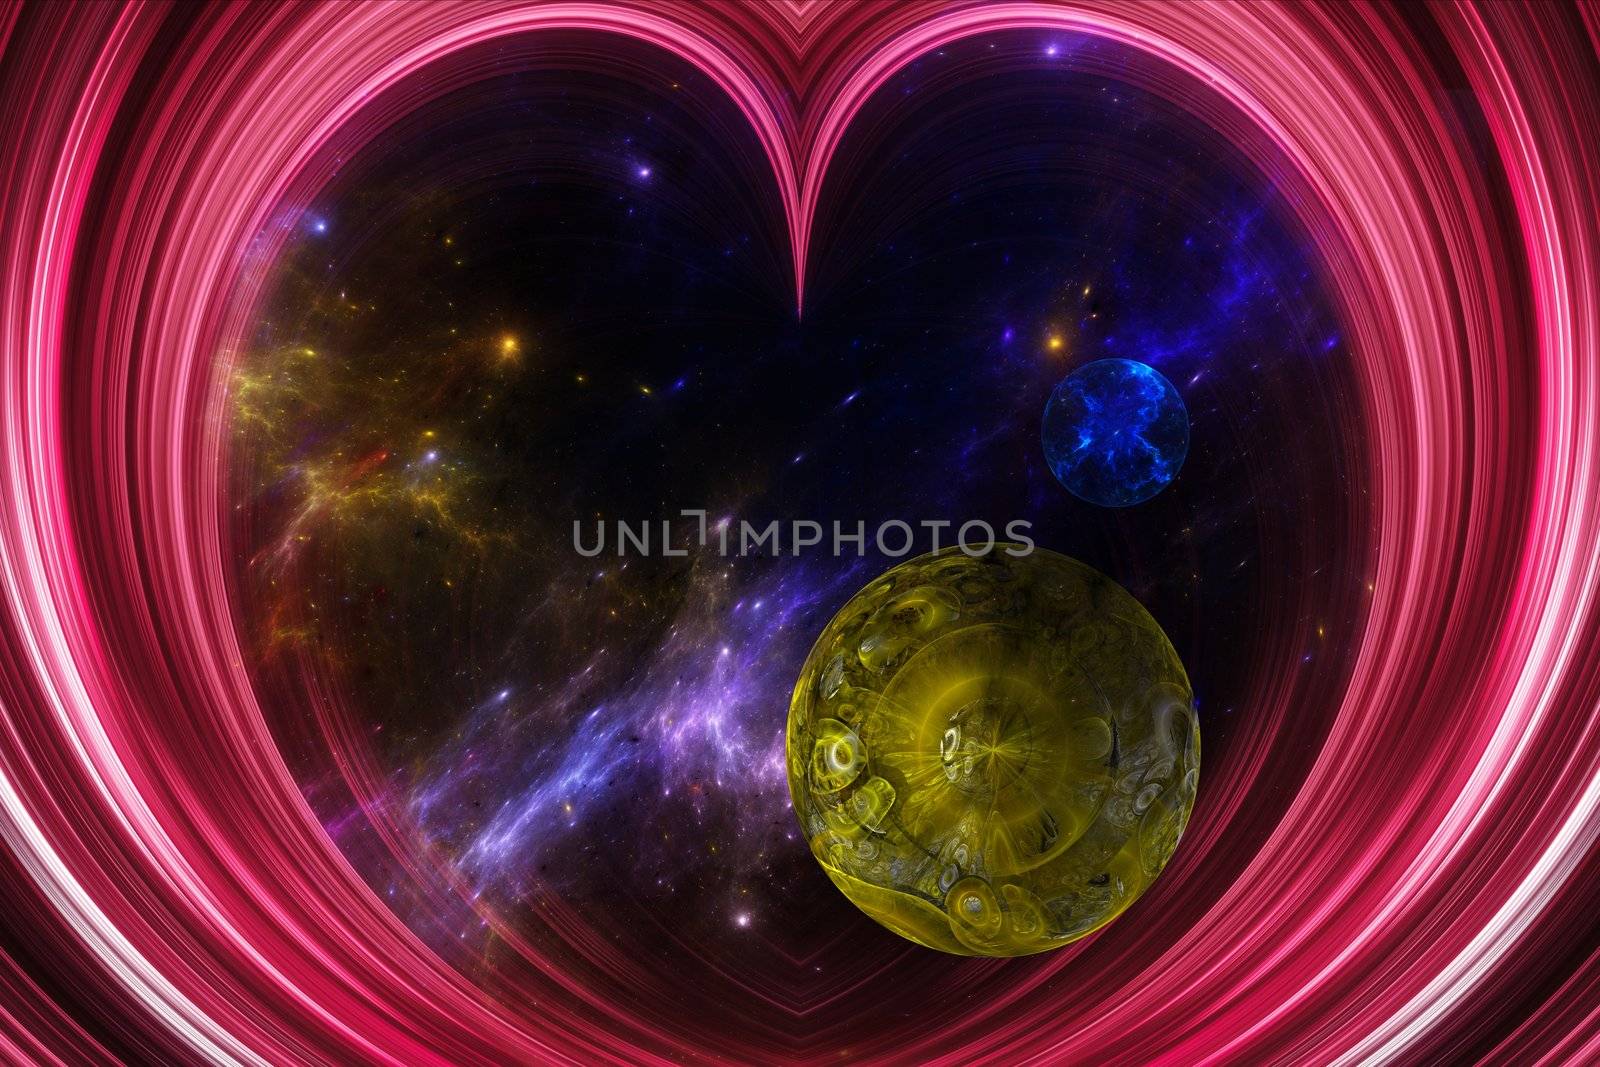 Illustration of an abstract  view of the Universe through a pink heart shaped  ' window ' showing galaxies, nebula, stars and planets.